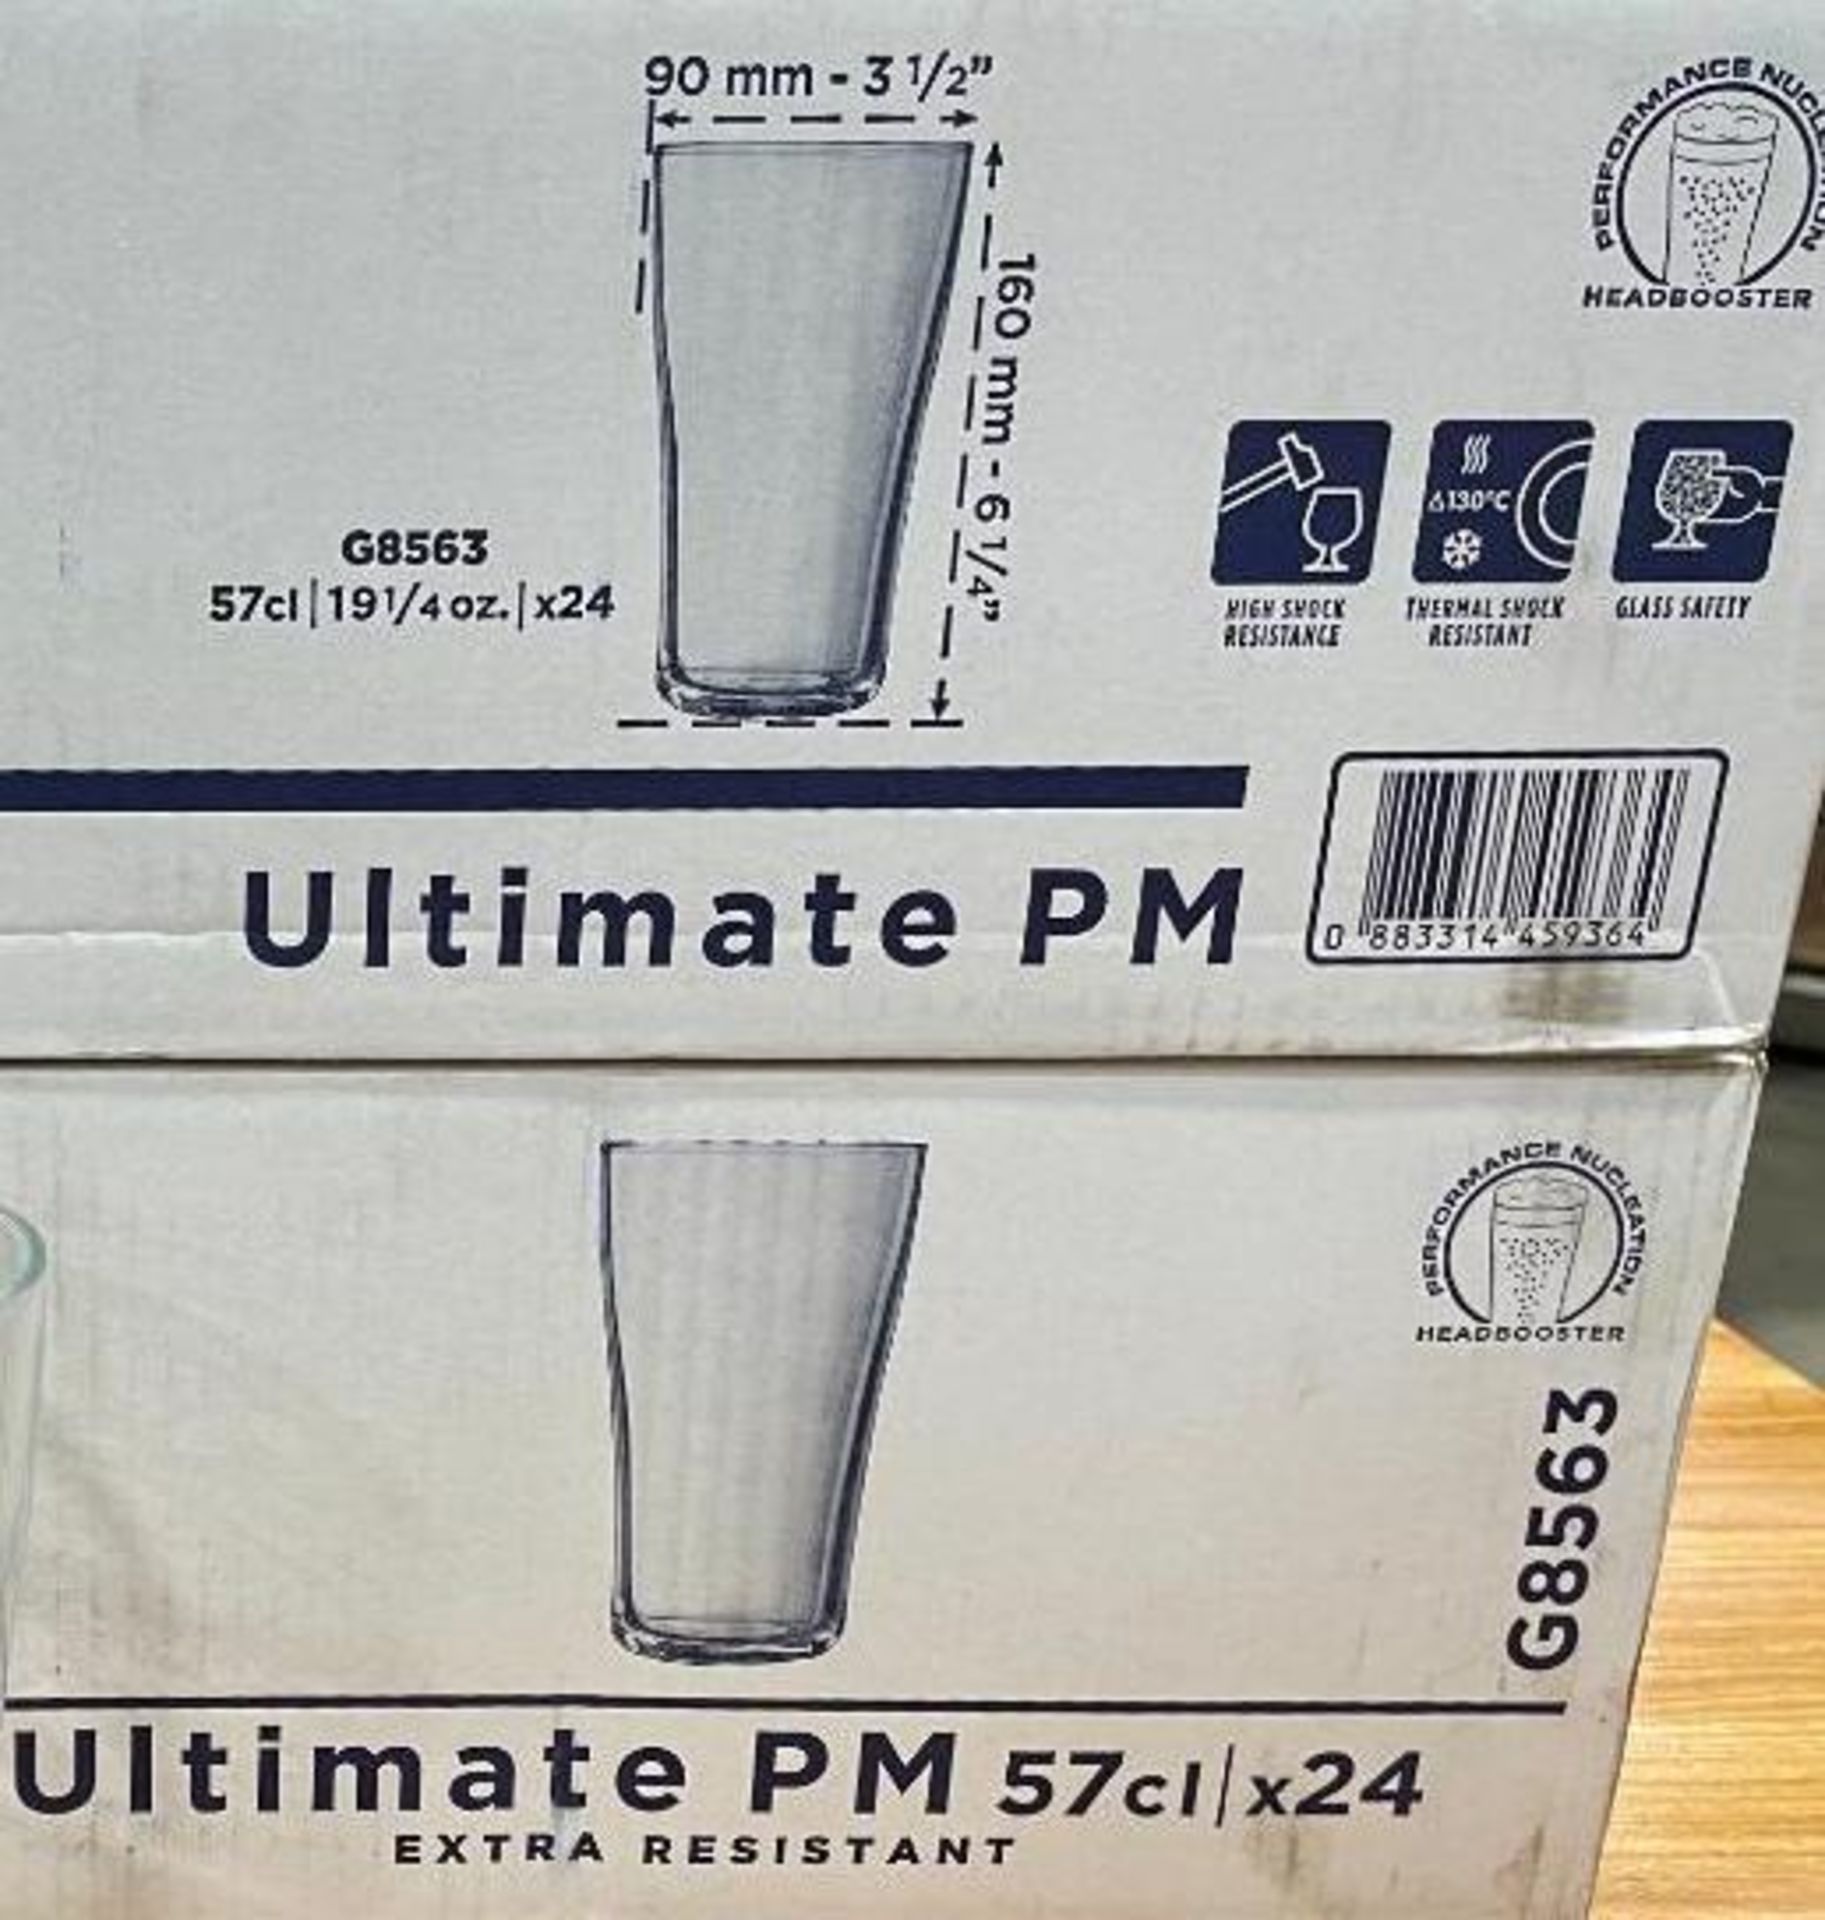 2 CASES OF ULTIMATE 20OZ PINT GLASSES, 24 PER CASE, ARCOROC G8563 - NEW - Image 5 of 7